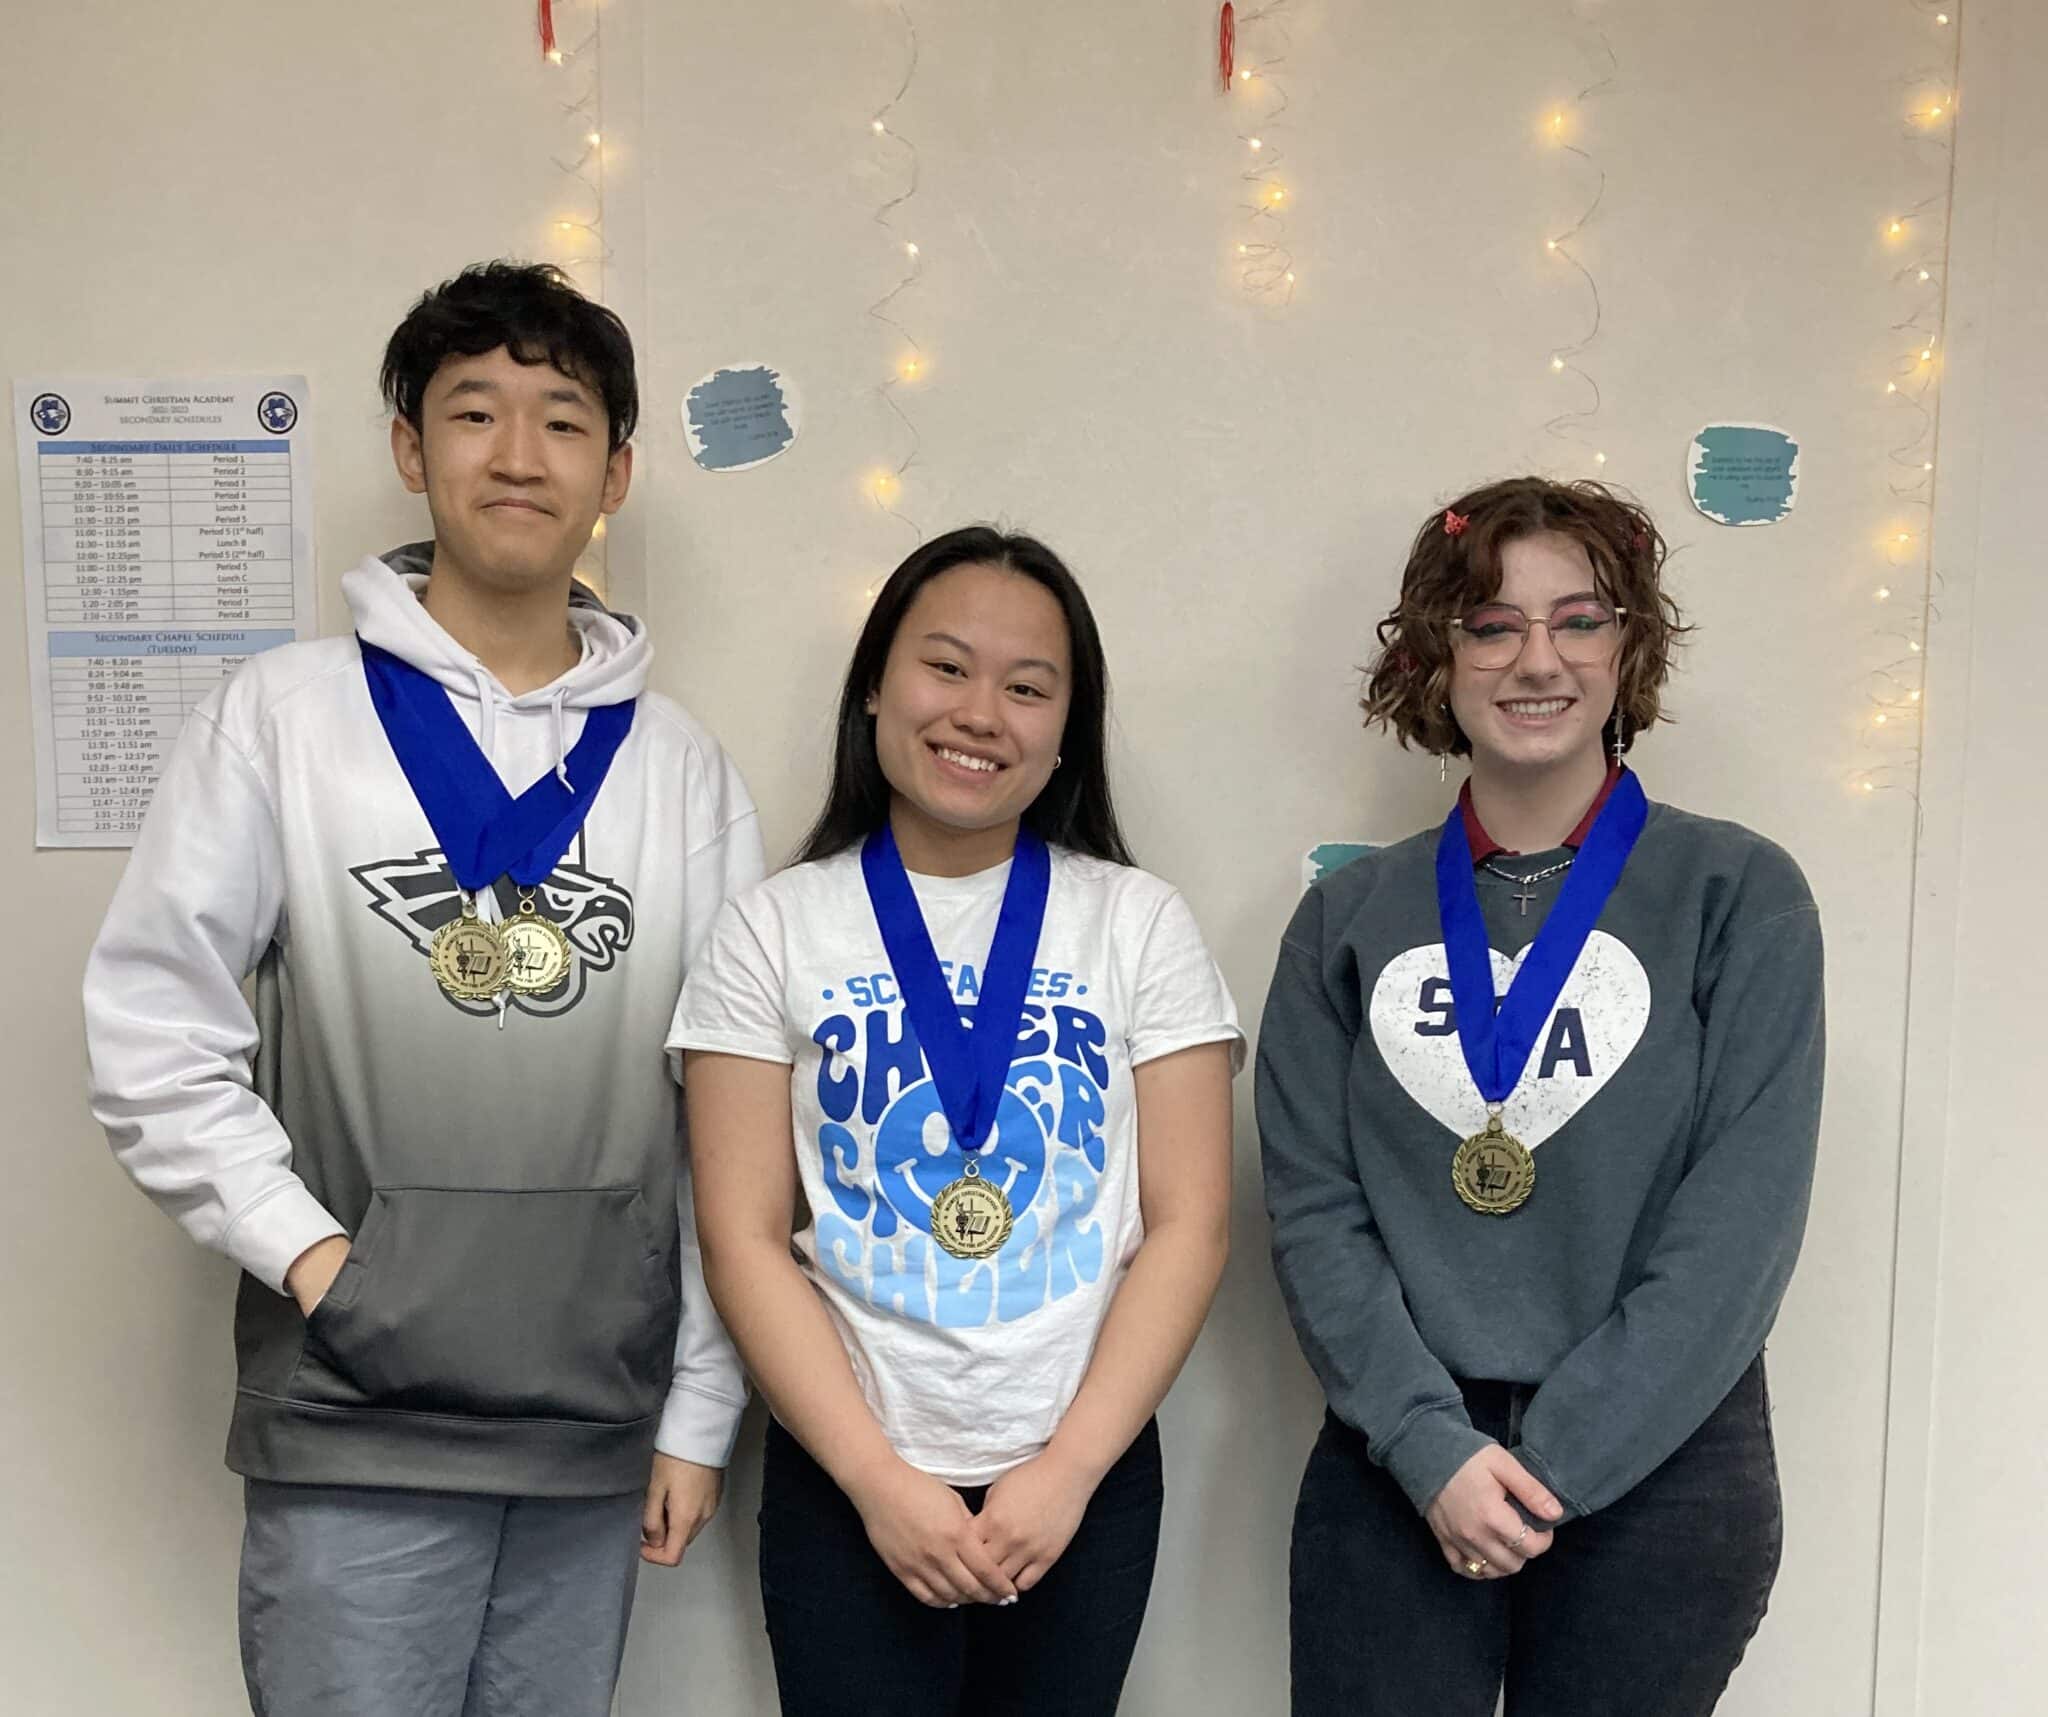 SCA juniors Tony Bu, Elissa Hesman, and Anna Hammond recently competed in the calculus portion of the Blue Ridge Midwest Festival math competition, where they took first place in team competition. Tony Bu also took 1st place in the individual competition.